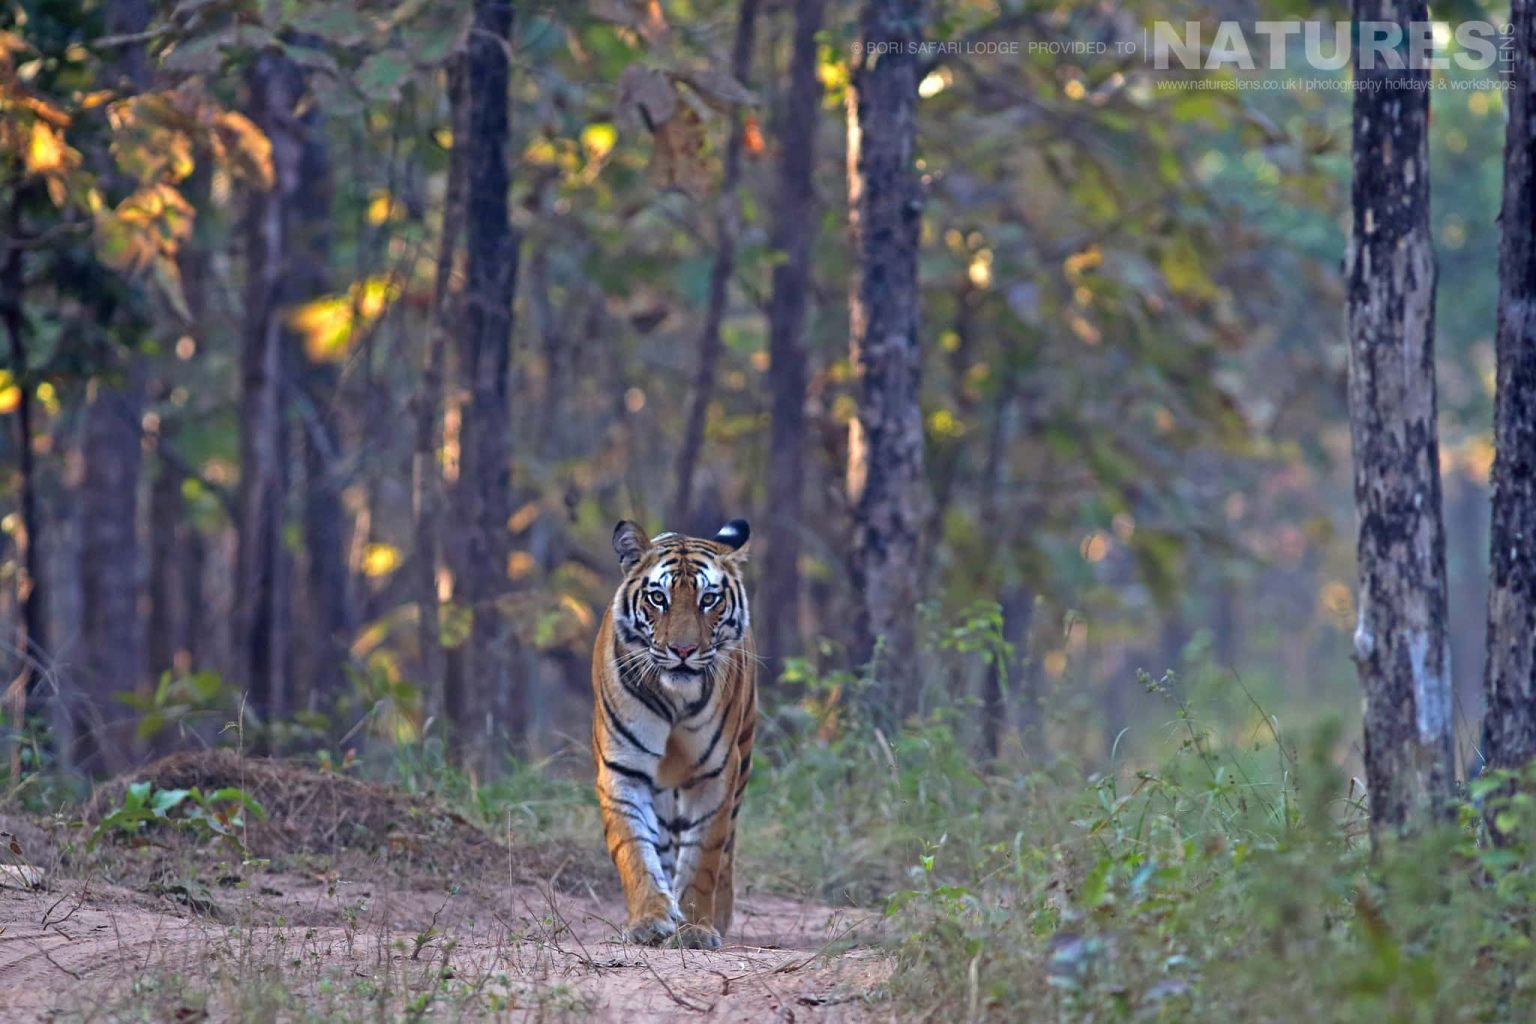 A Tiger strides forward photographed within the Satpura National Park - one of the locations used during the NaturesLens Wildlife of Madhya Pradesh photography  holiday